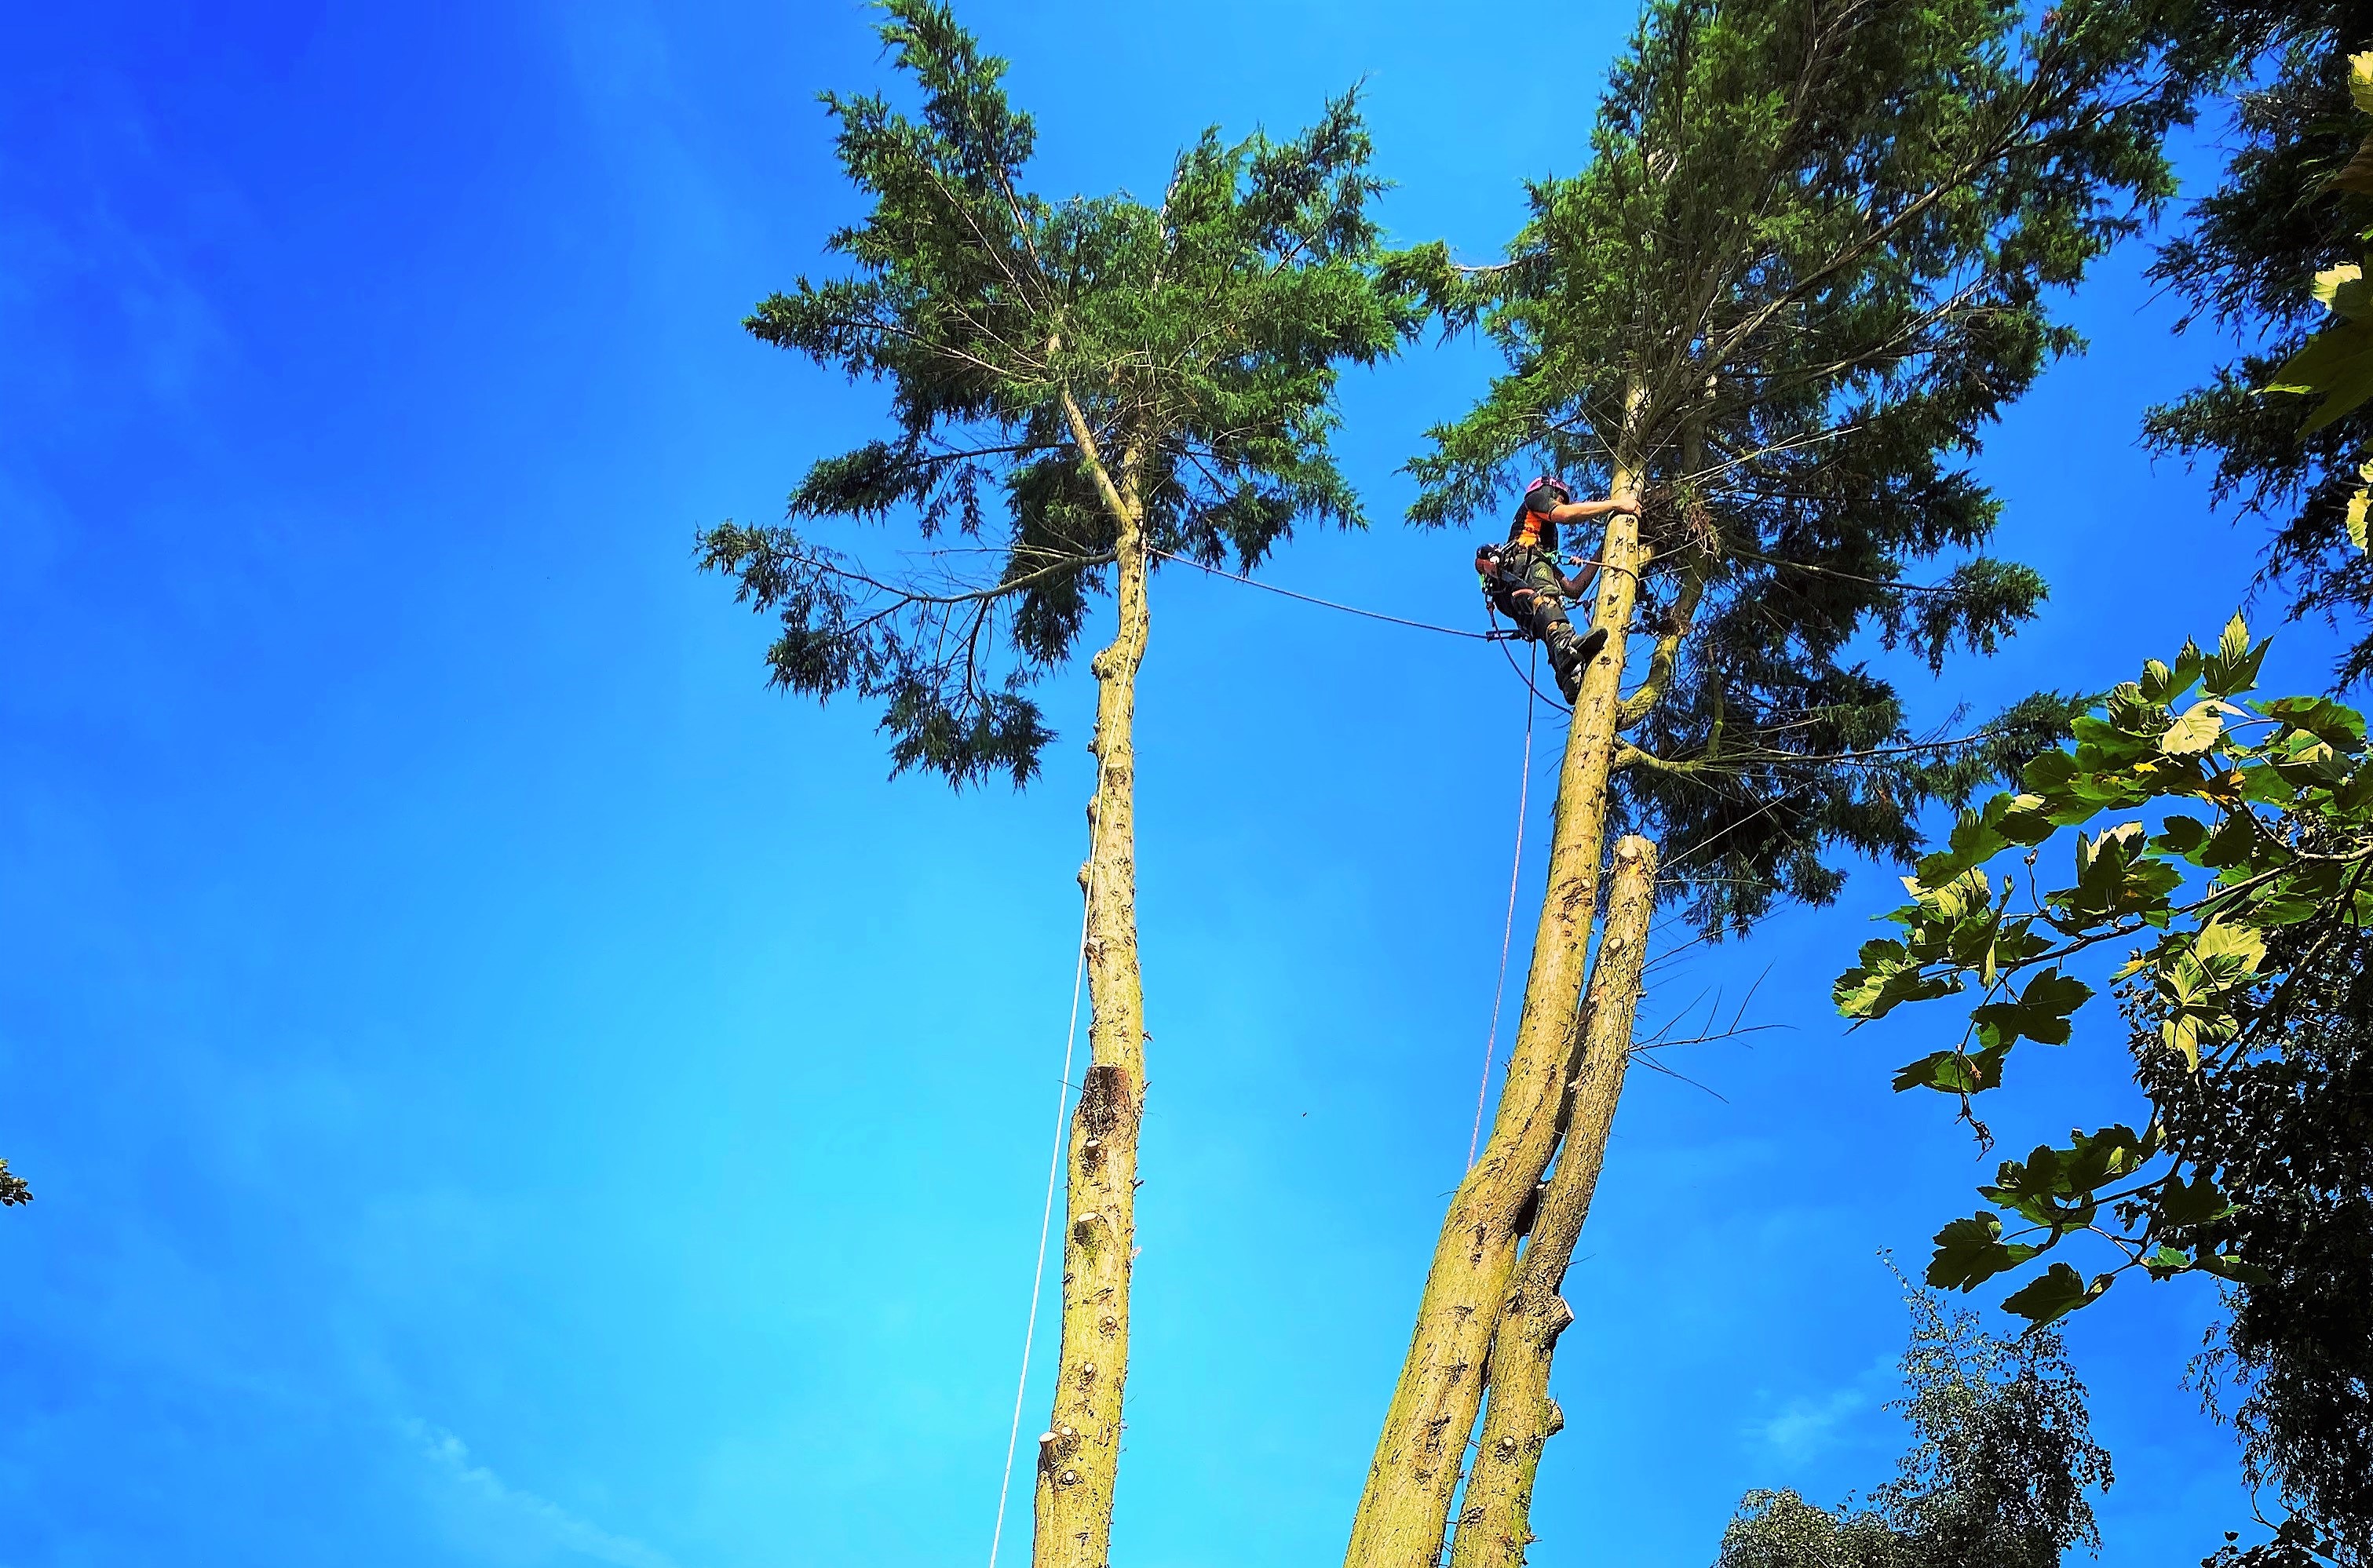 Dorchester tree surgeon team in south Dorset covering Dorchester town and surrounding village areas. Professional arborist team offering tree care, tree removal, tree felling, hedge trimming, hedge removal, stump grinding services.